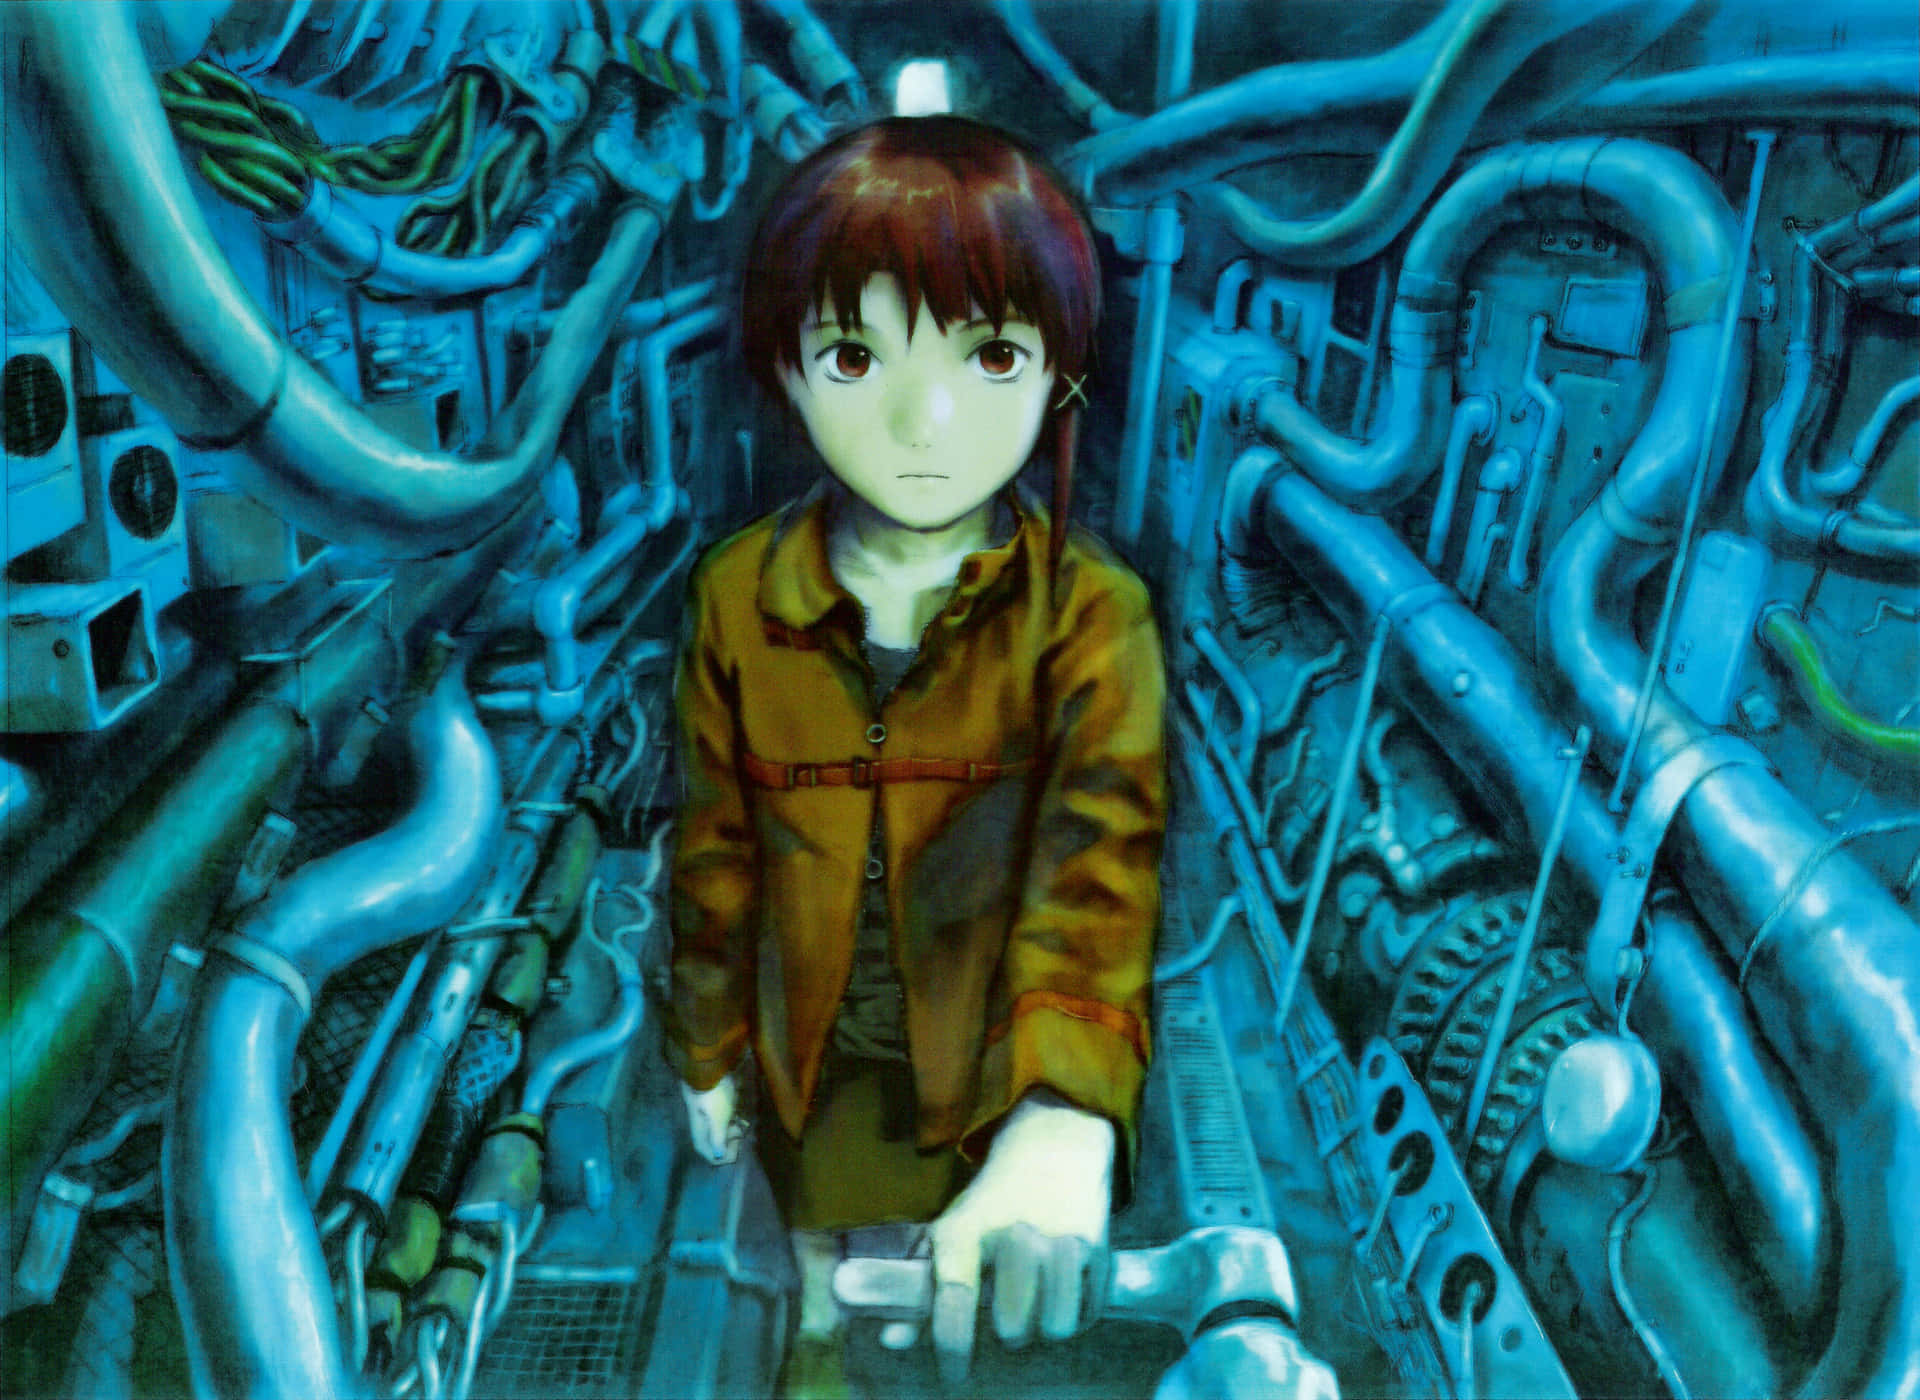 Serial Experiments Lain Continues To Captivate The Minds Of Anime Fans Around The World.